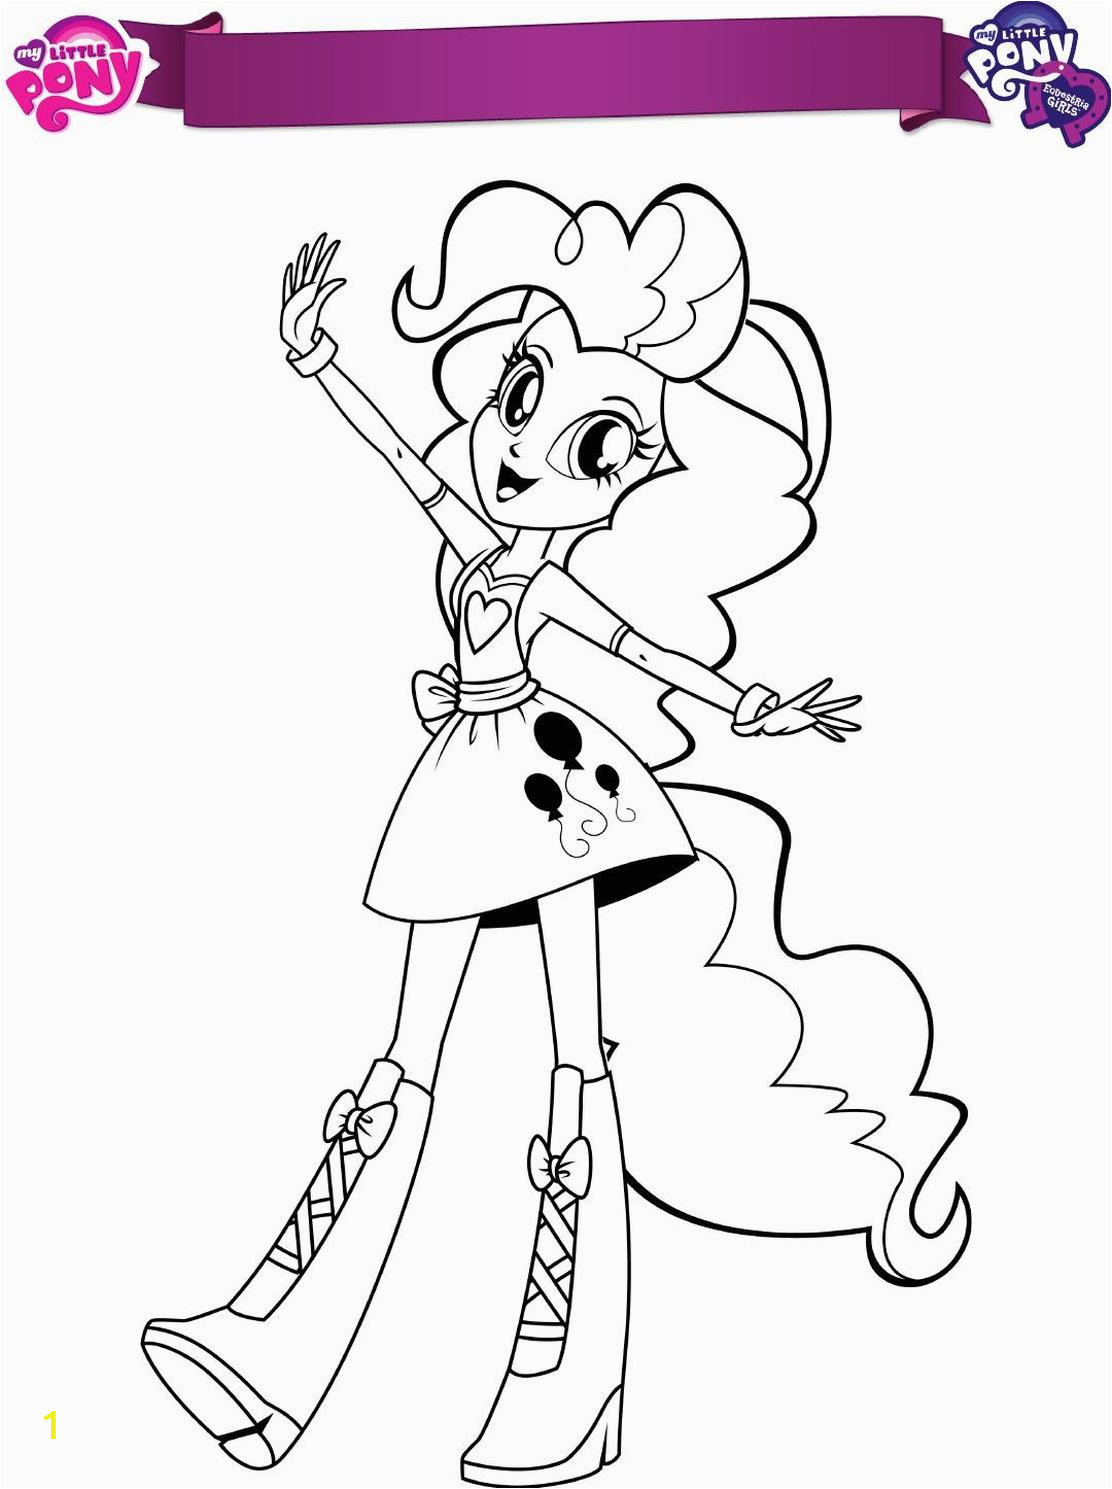 Pinkie Pie Equestria Girl Coloring Pages Get This Equestria Girls Coloring Pages Pony Pinkie Pie